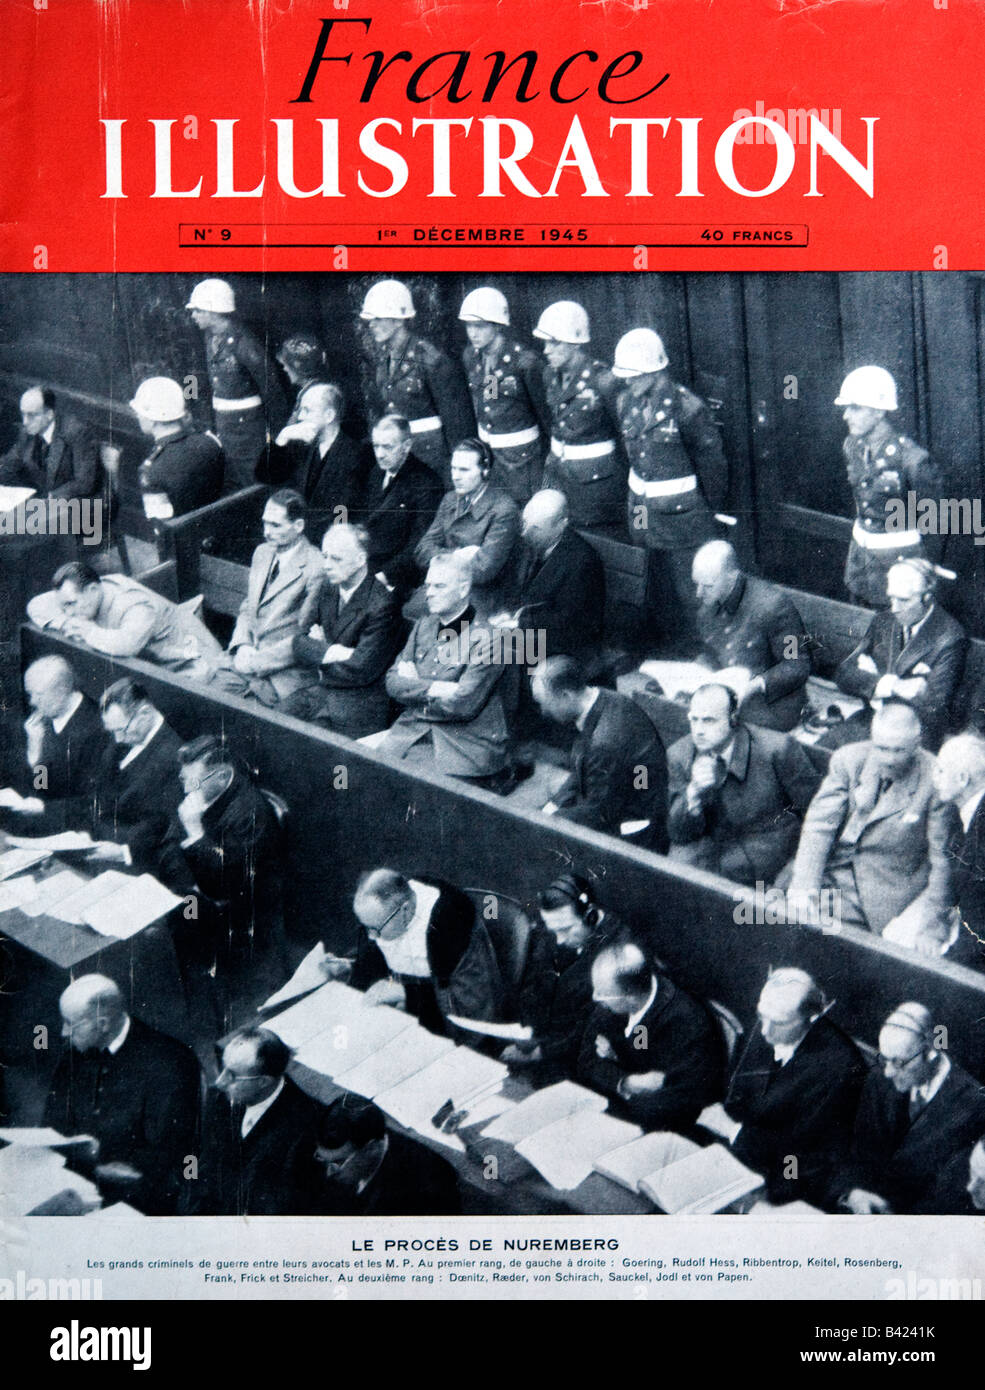 France Illustration French Magazine 1 December 1945 covering the Nuremberg Trials FOR EDITORIAL USE ONLY Stock Photo